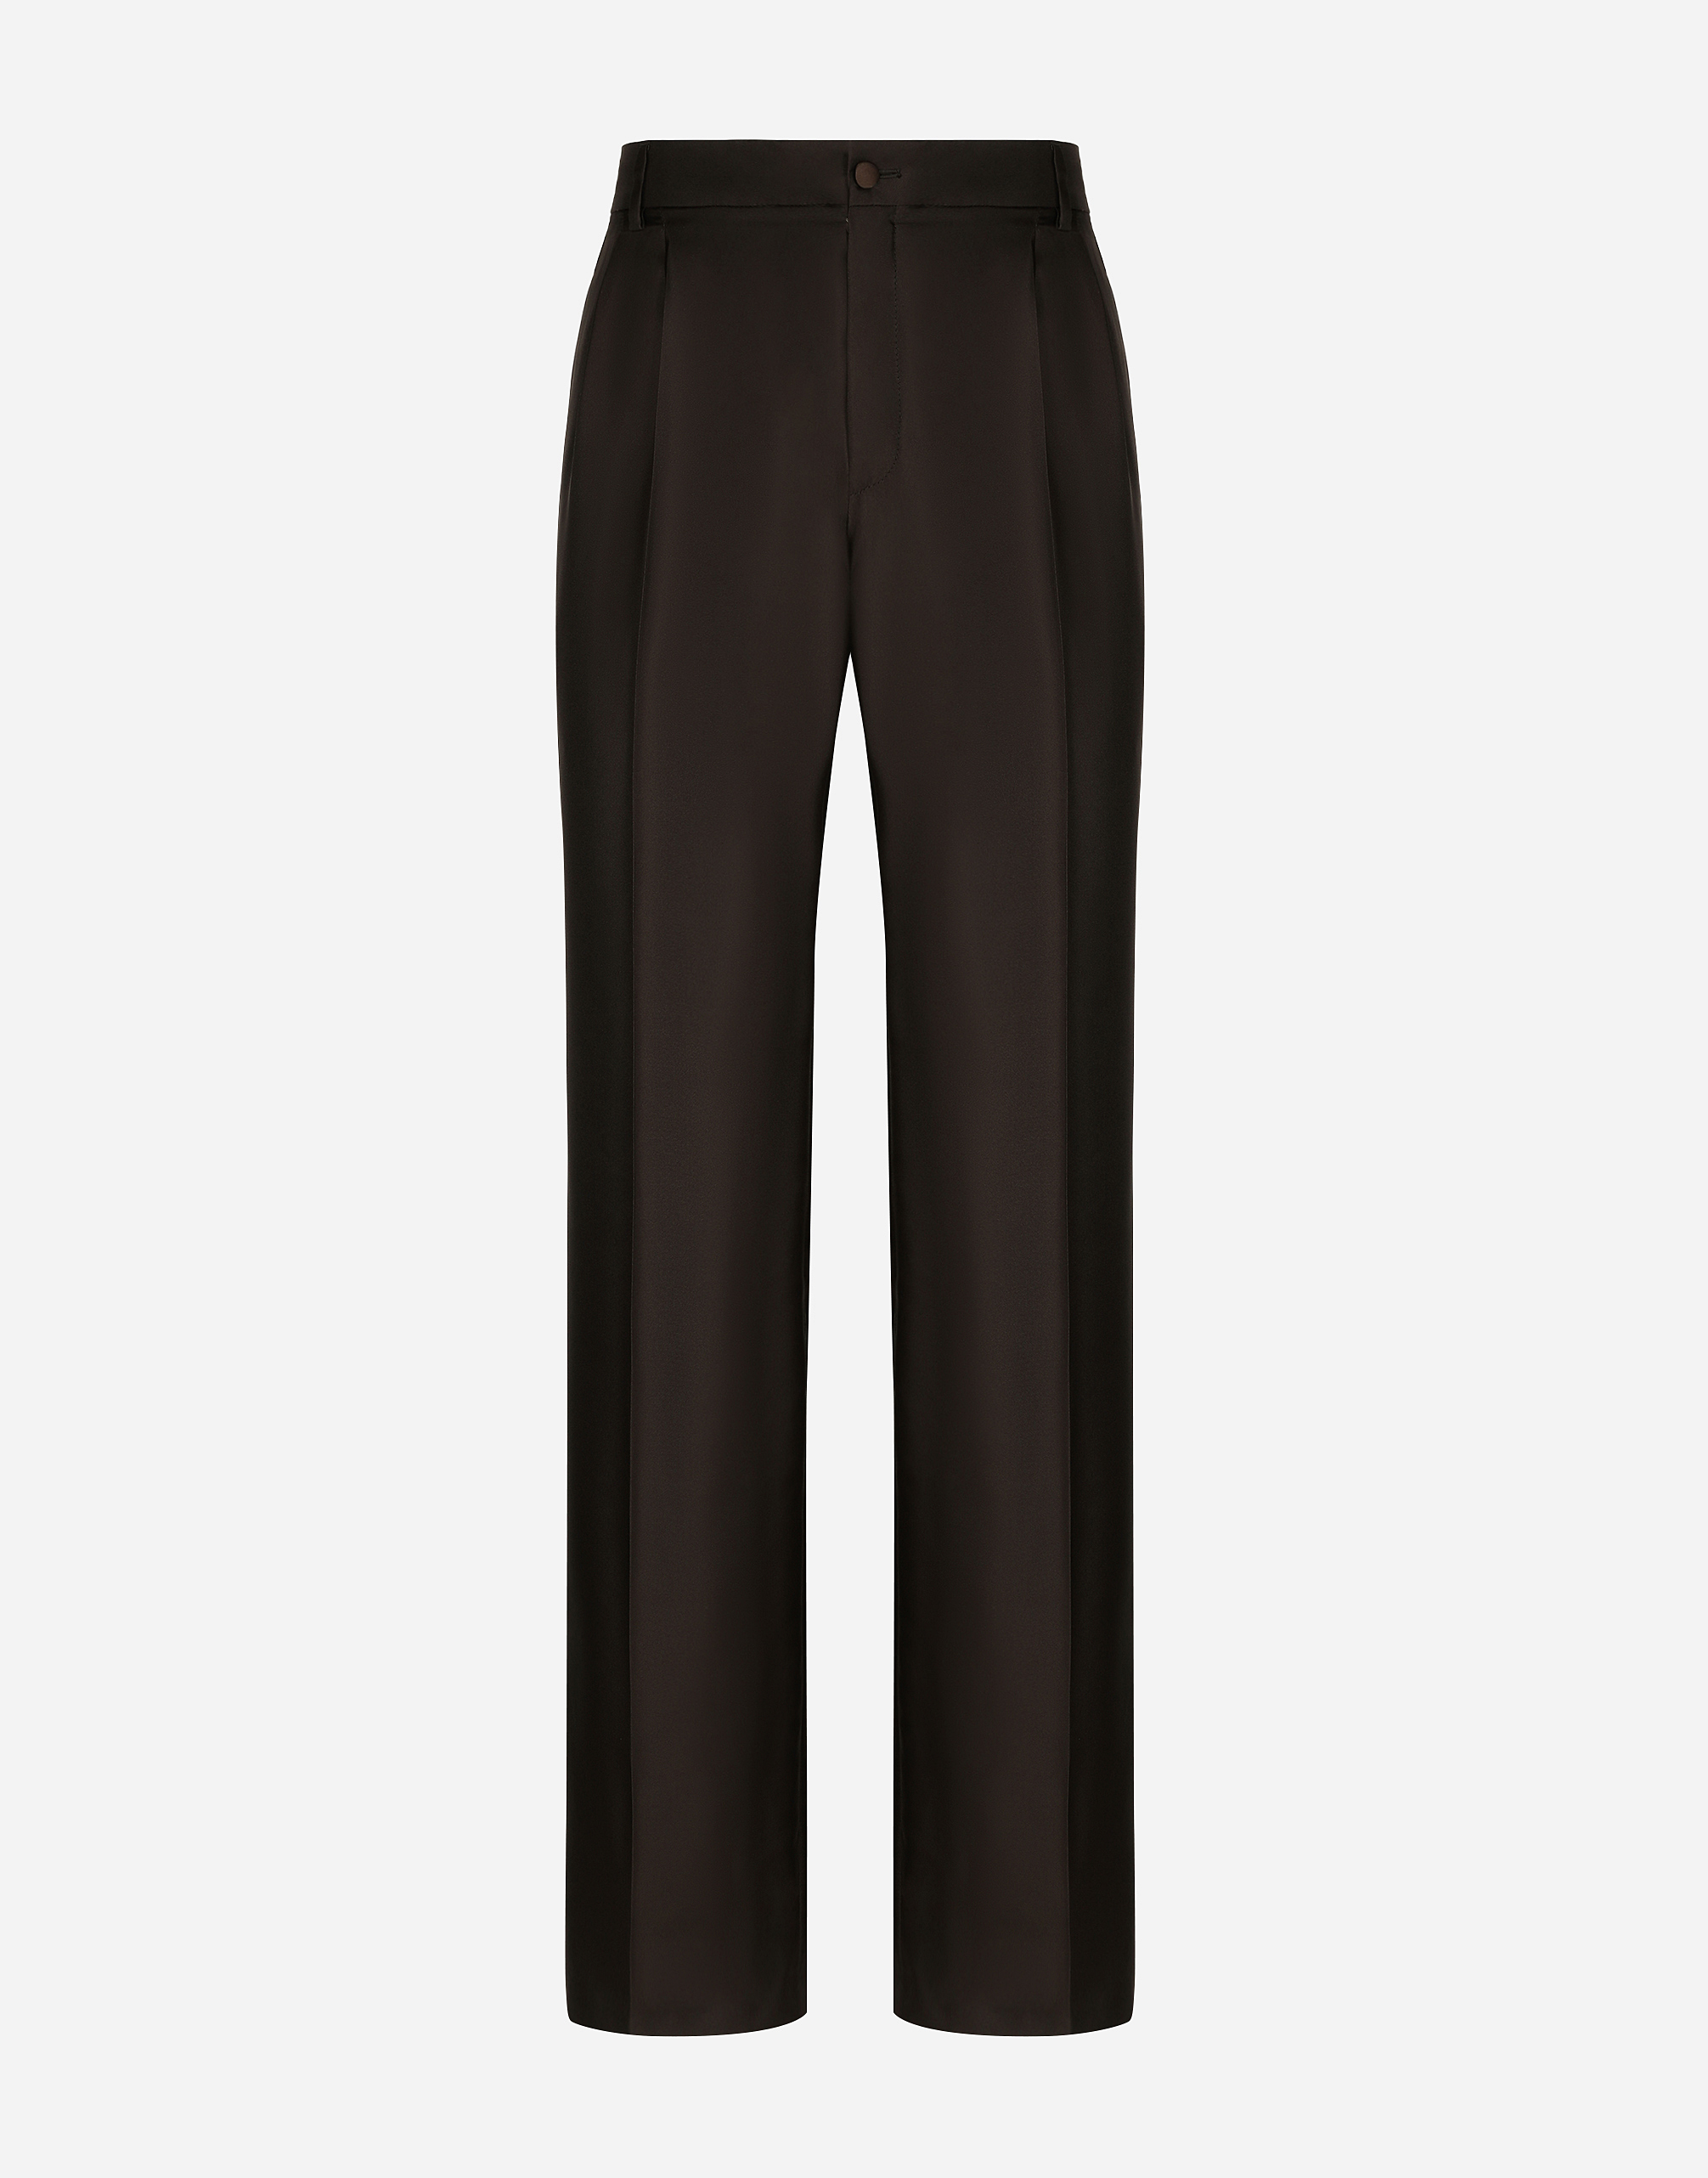 Tailored silk pants with darts